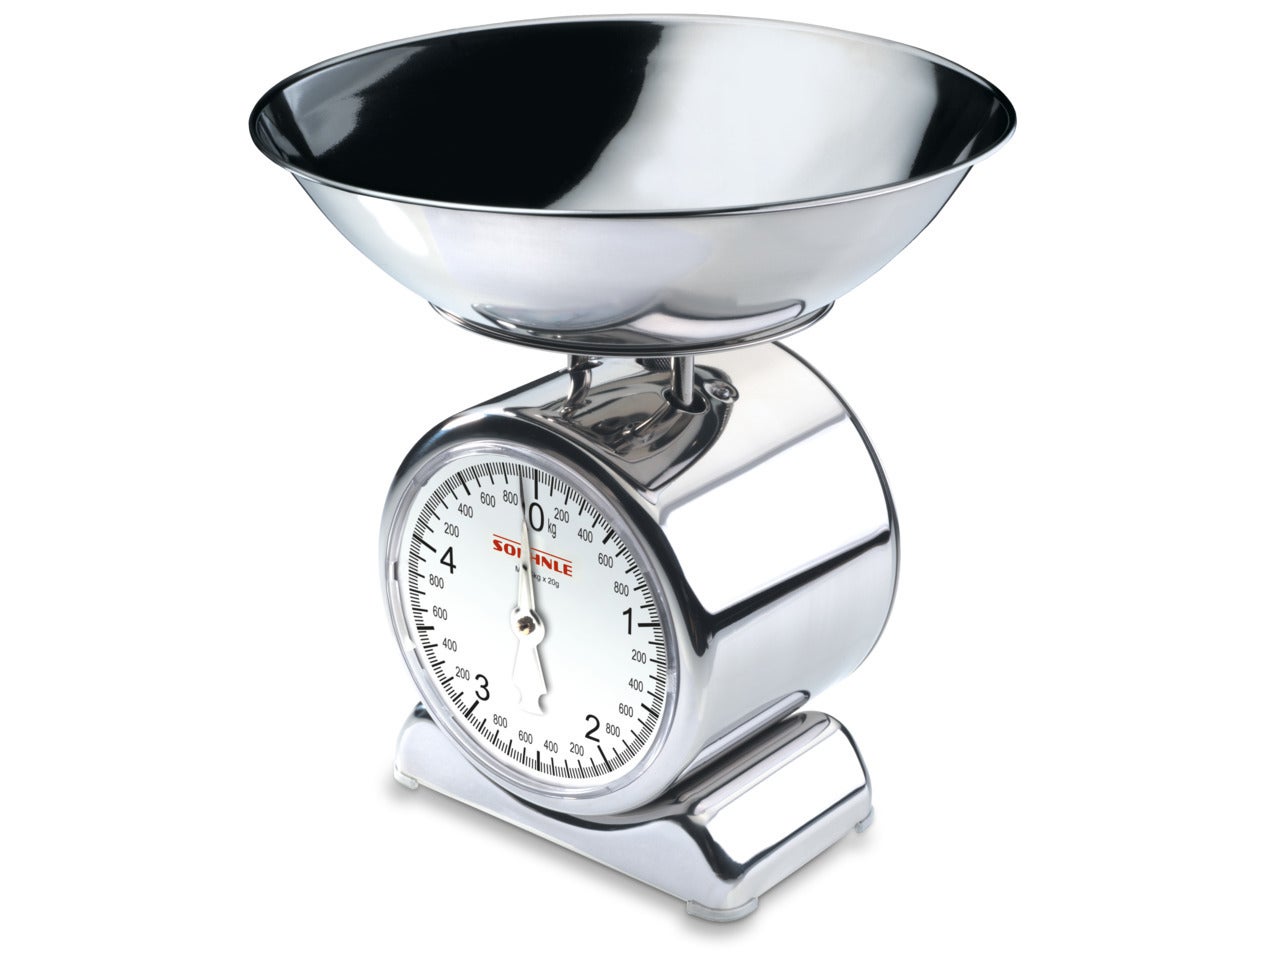 SOEHNLE Silvia 5kg Large Analogue Kitchen Scale Weighing